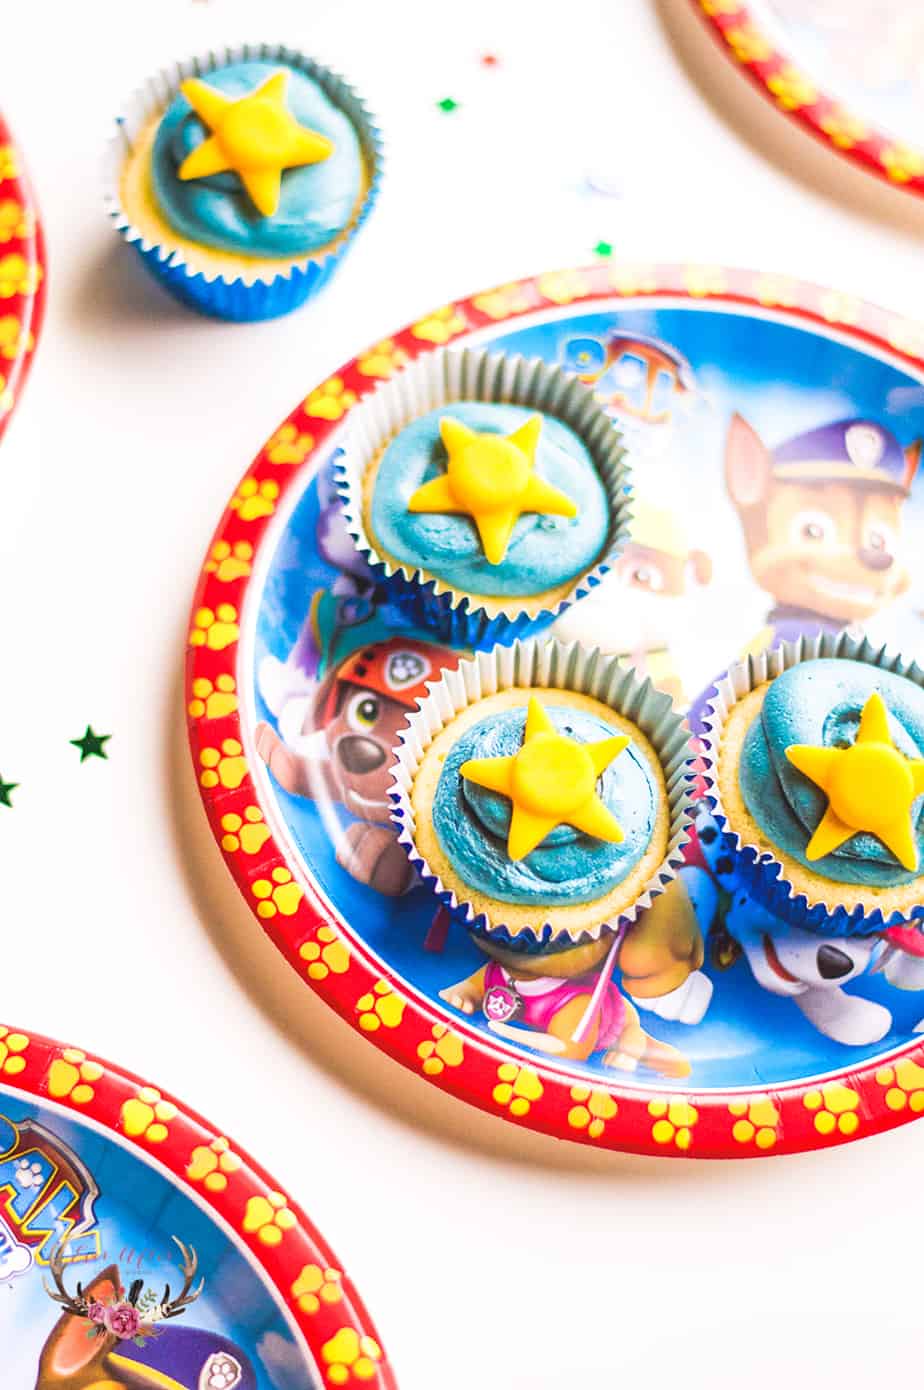 If you have a toddler, these Paw Patrol Cupcakes are exactly what you need to make the everyday special.